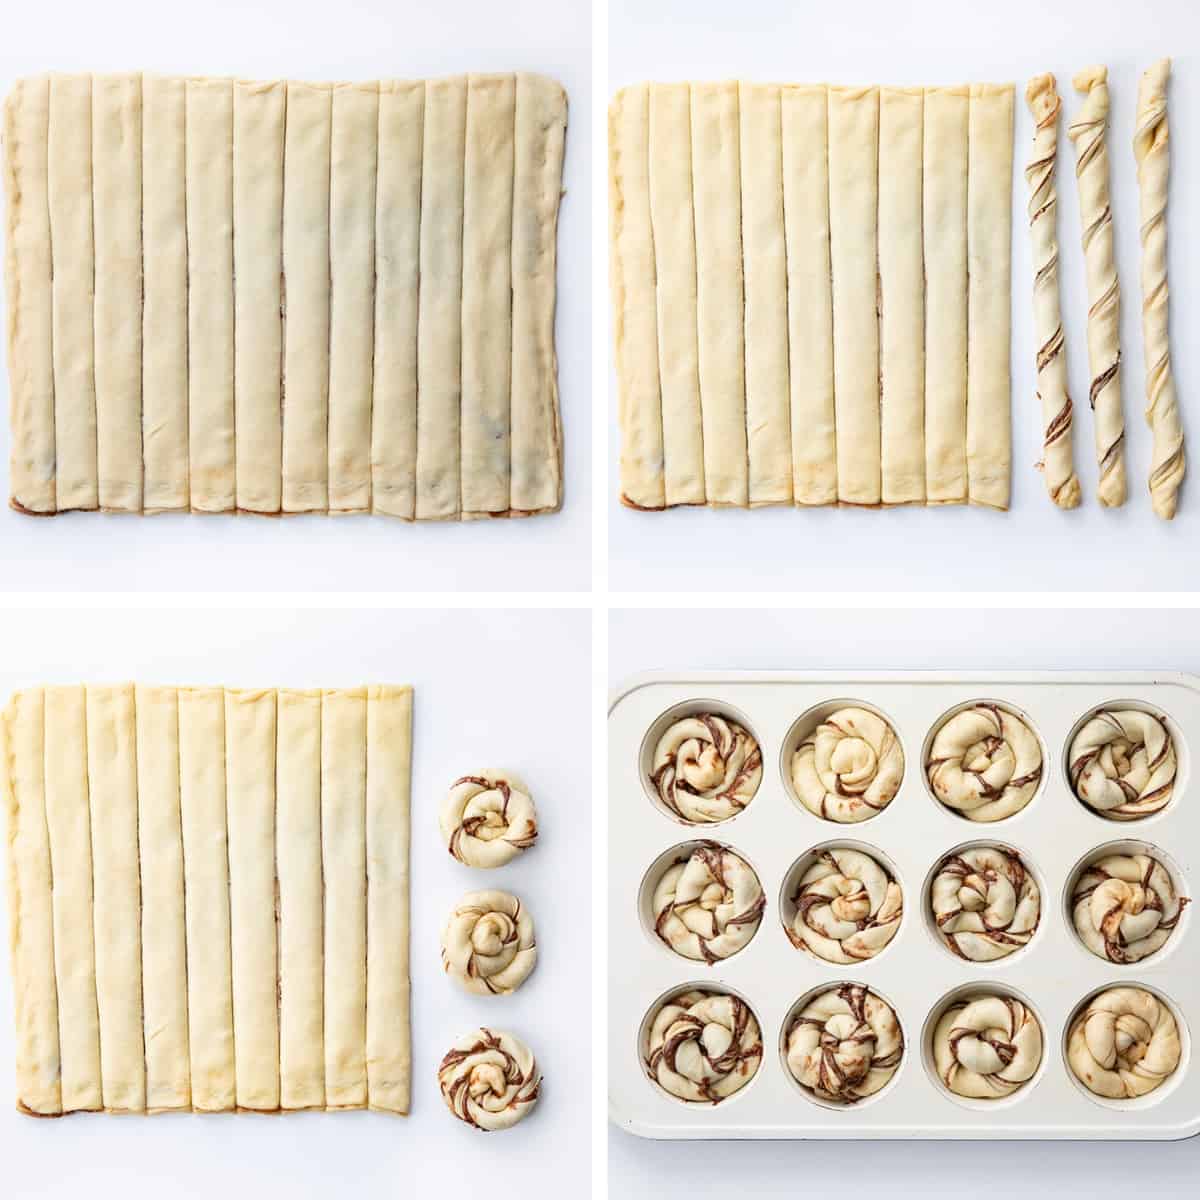 Steps for making a Chocolate Hazelnut Twists with cutting, twisting, and placing the raw twists into a pan.